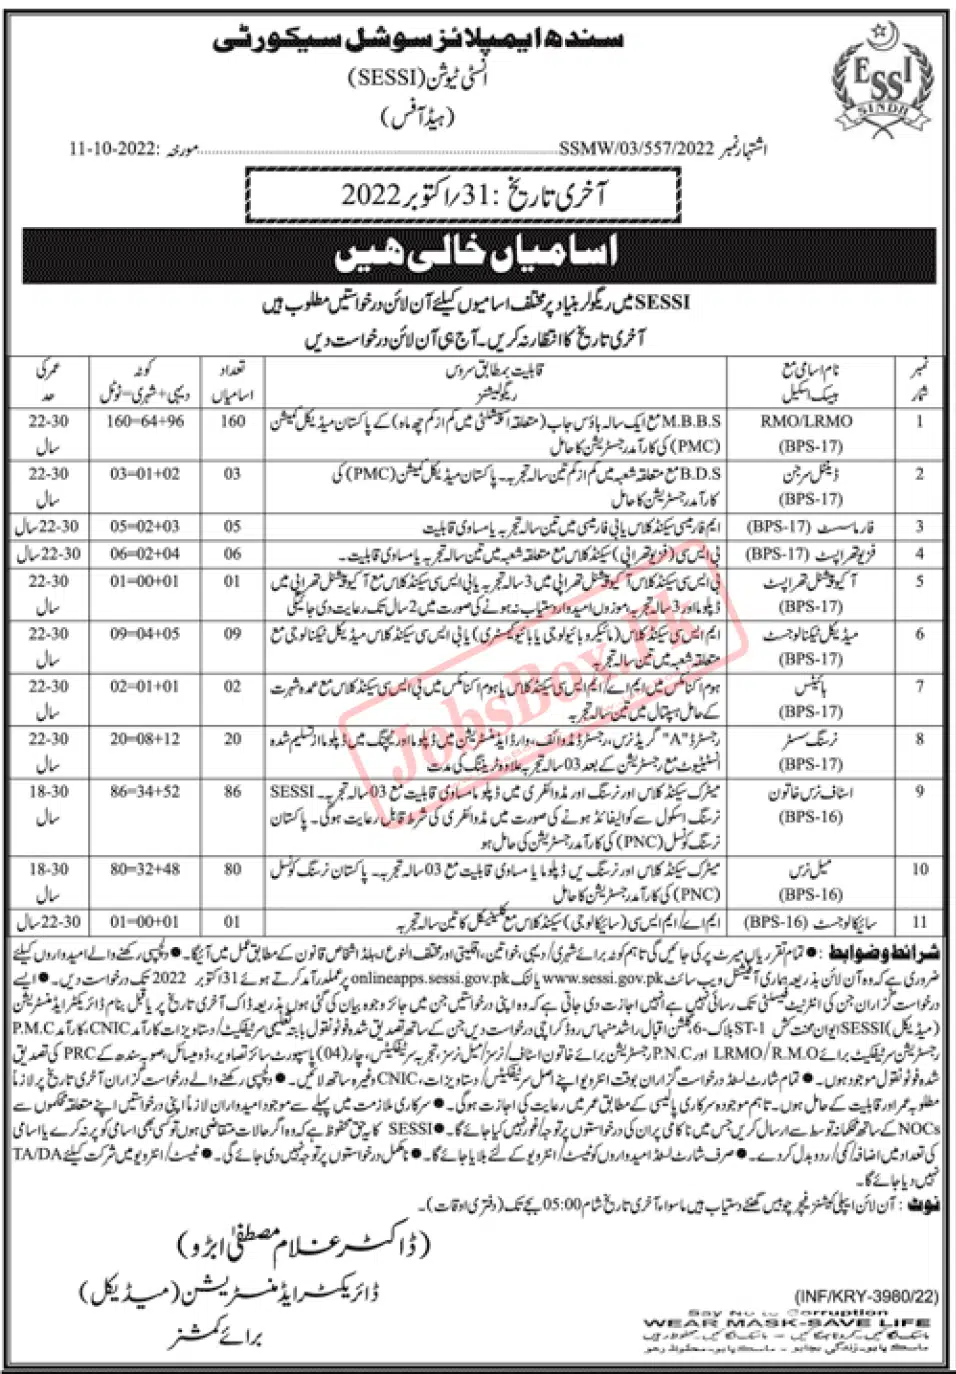 New SESSI Jobs 2022 on Regular Basis - 373 Vacancies for Sindh Residents